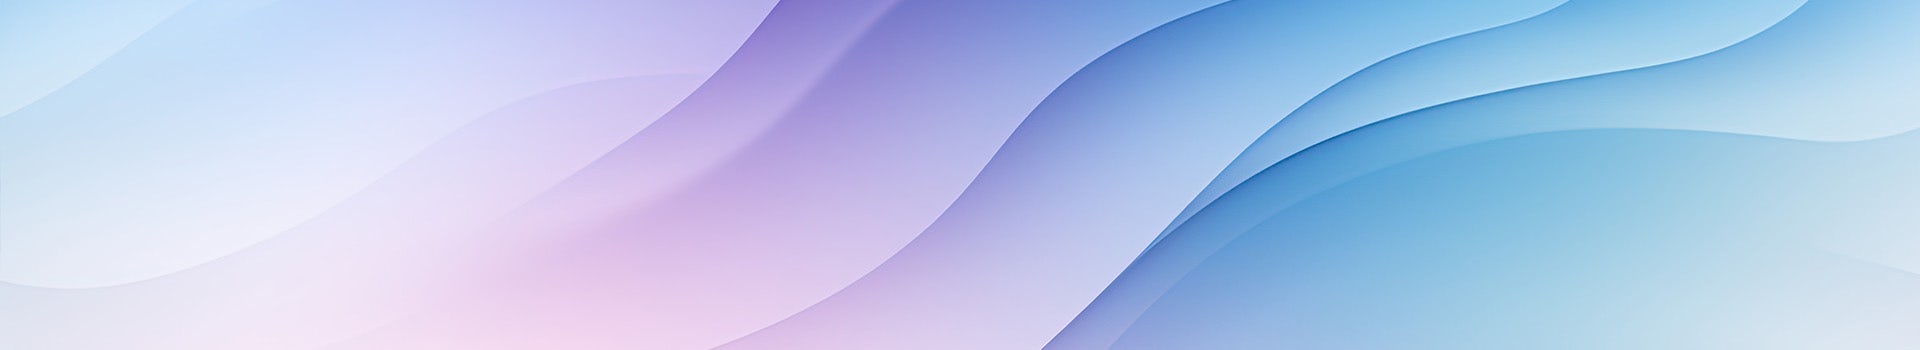 A blue and pink abstract wallpaper with wavy lines.